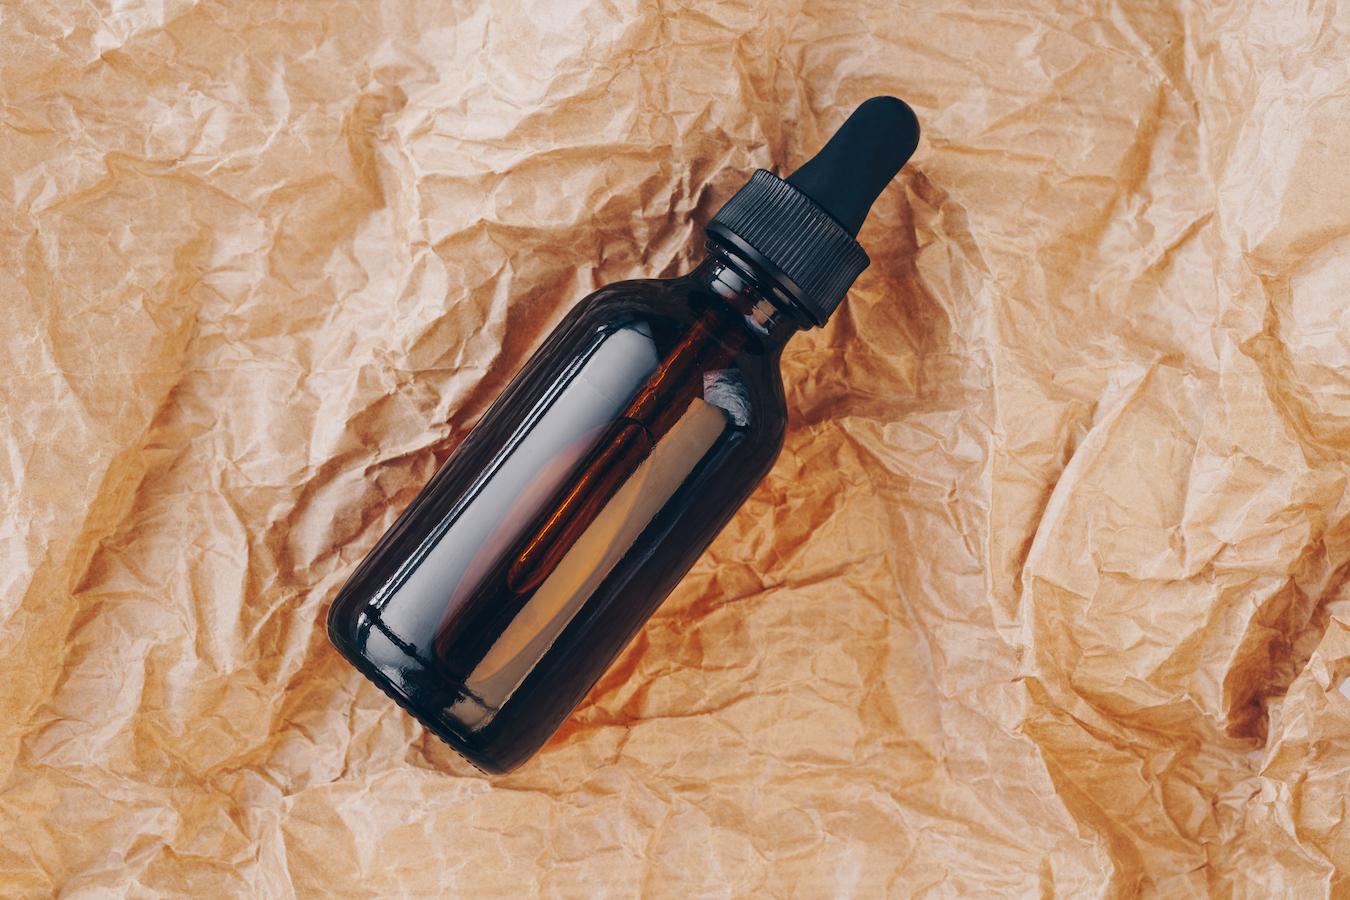 a bottle of tincture on a piece of paper essential oil ethyl alcohol plant compounds herbal tincture plant material essential oils essential oils herbal tinctures cannabis tincture essential oils